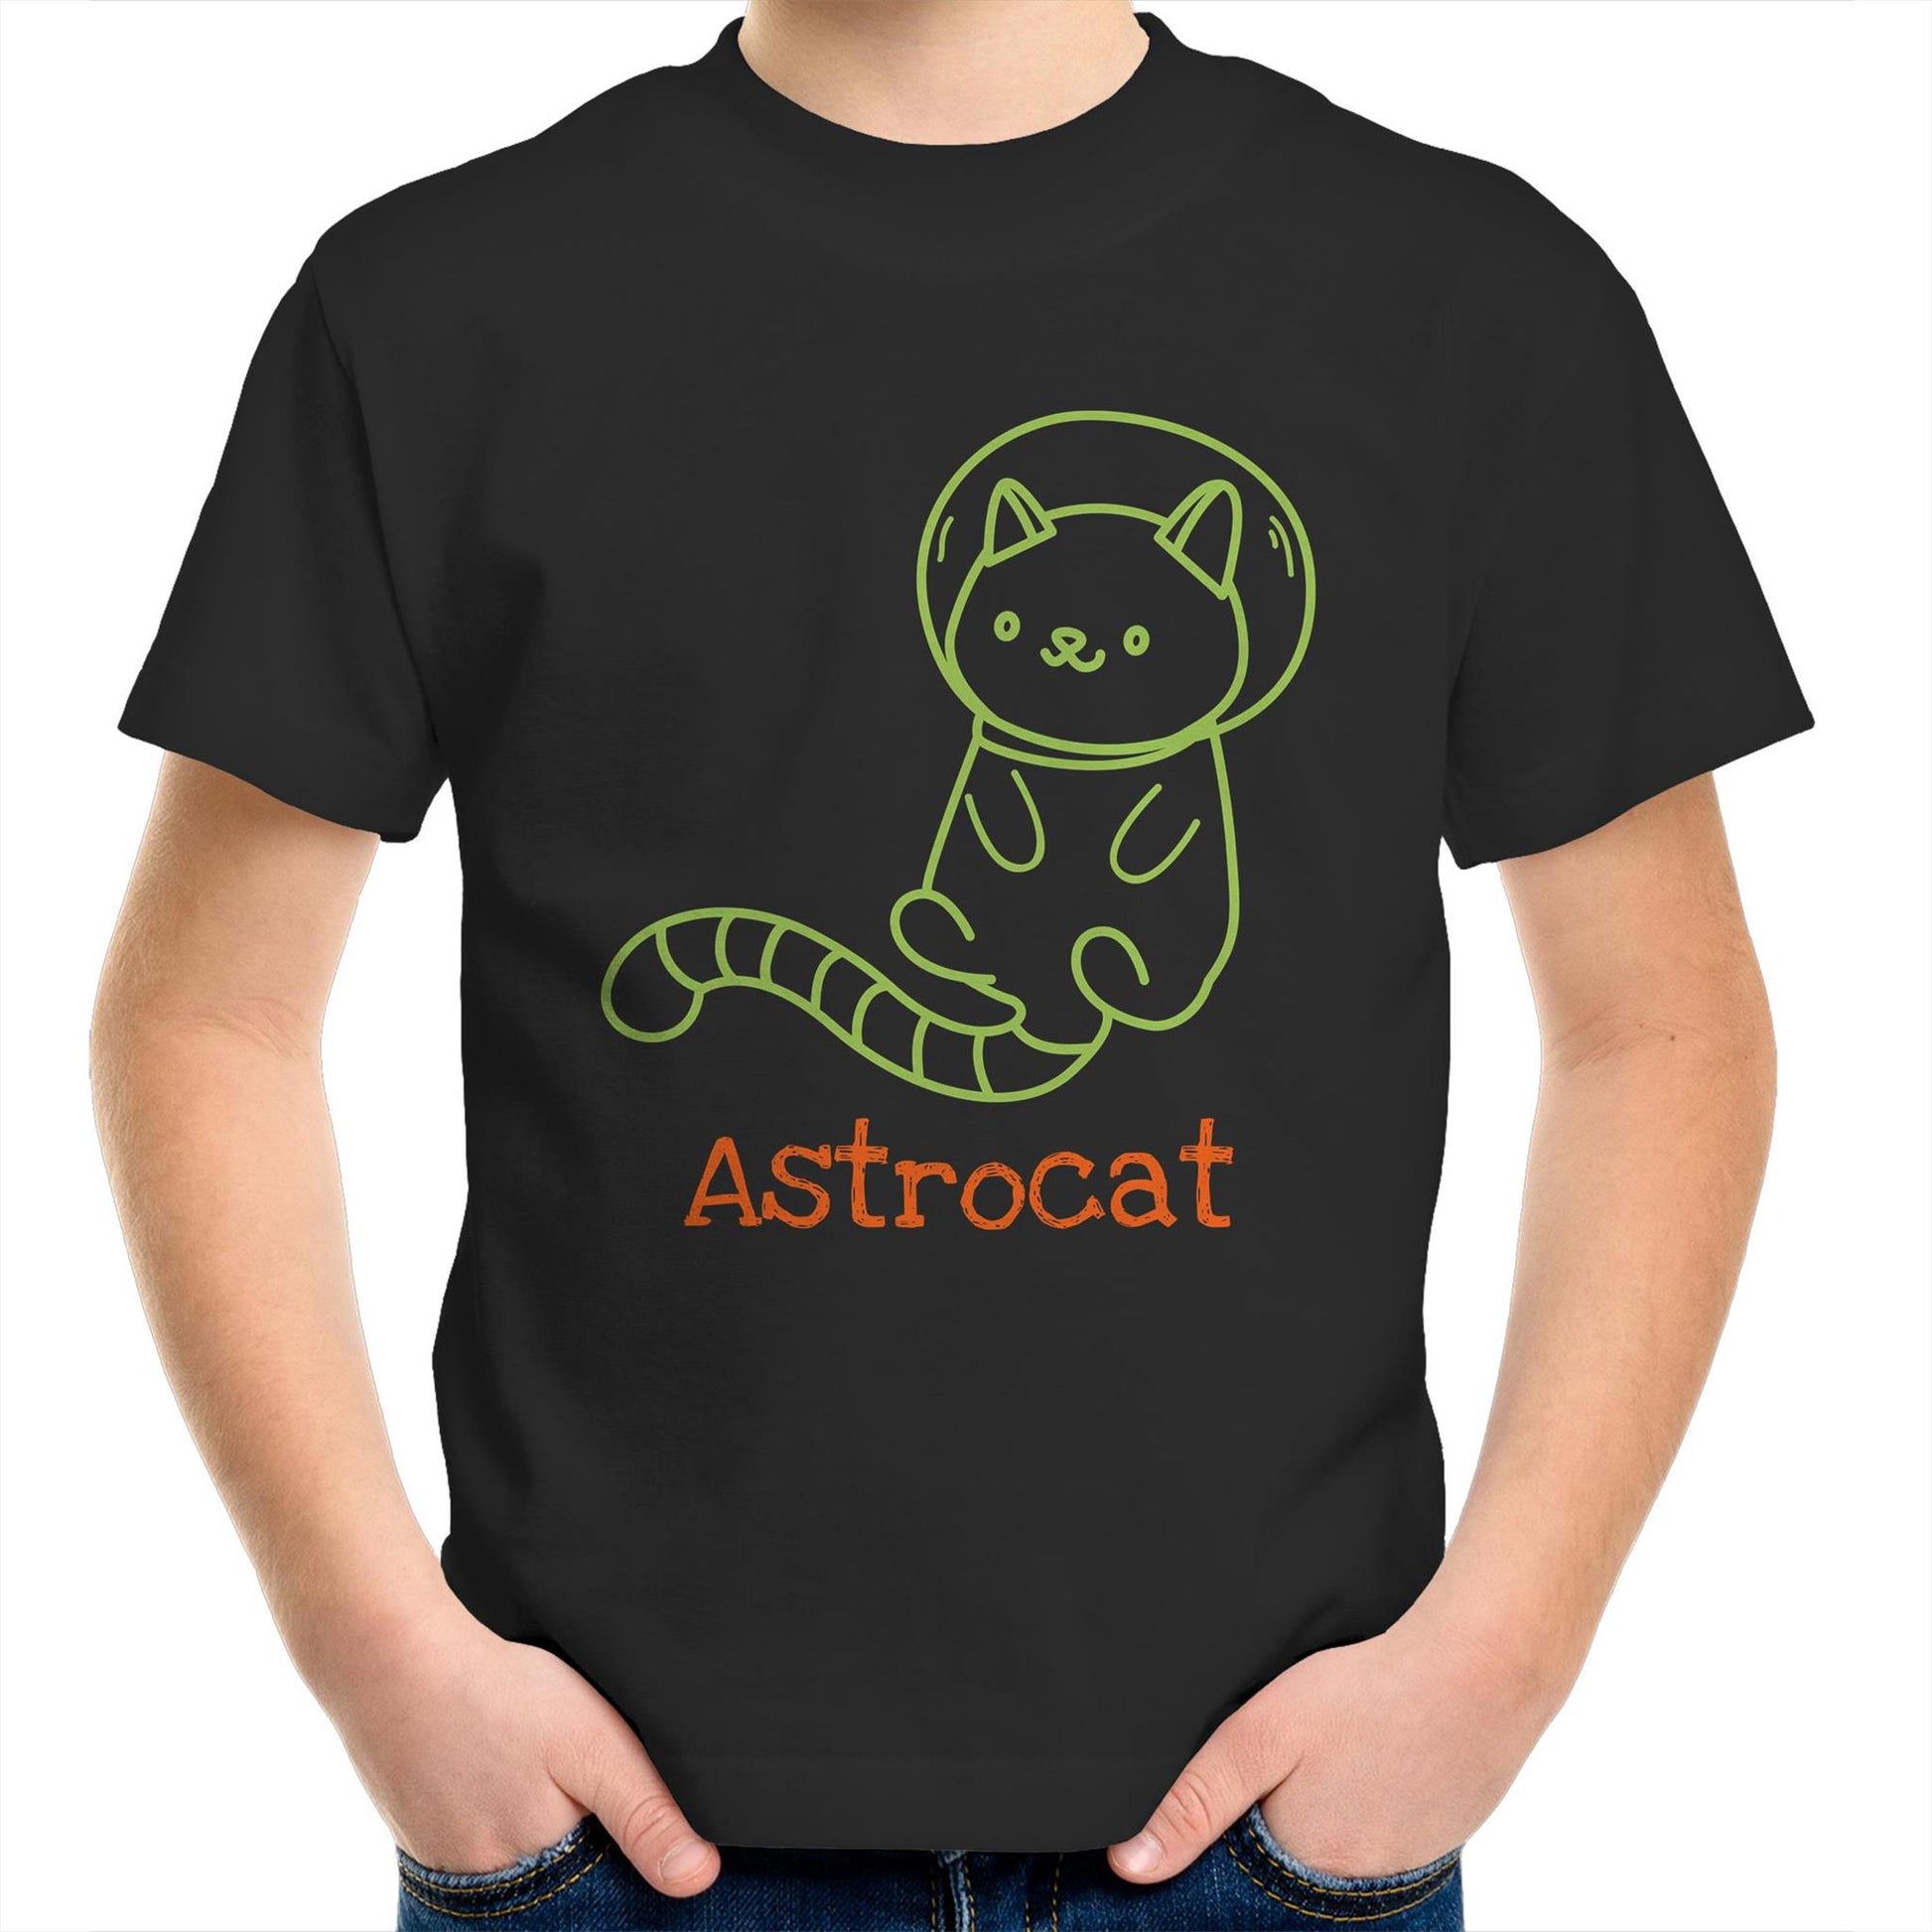 Astrocat - Kids Youth Crew T-Shirt Black Kids Youth T-shirt animal Funny Space